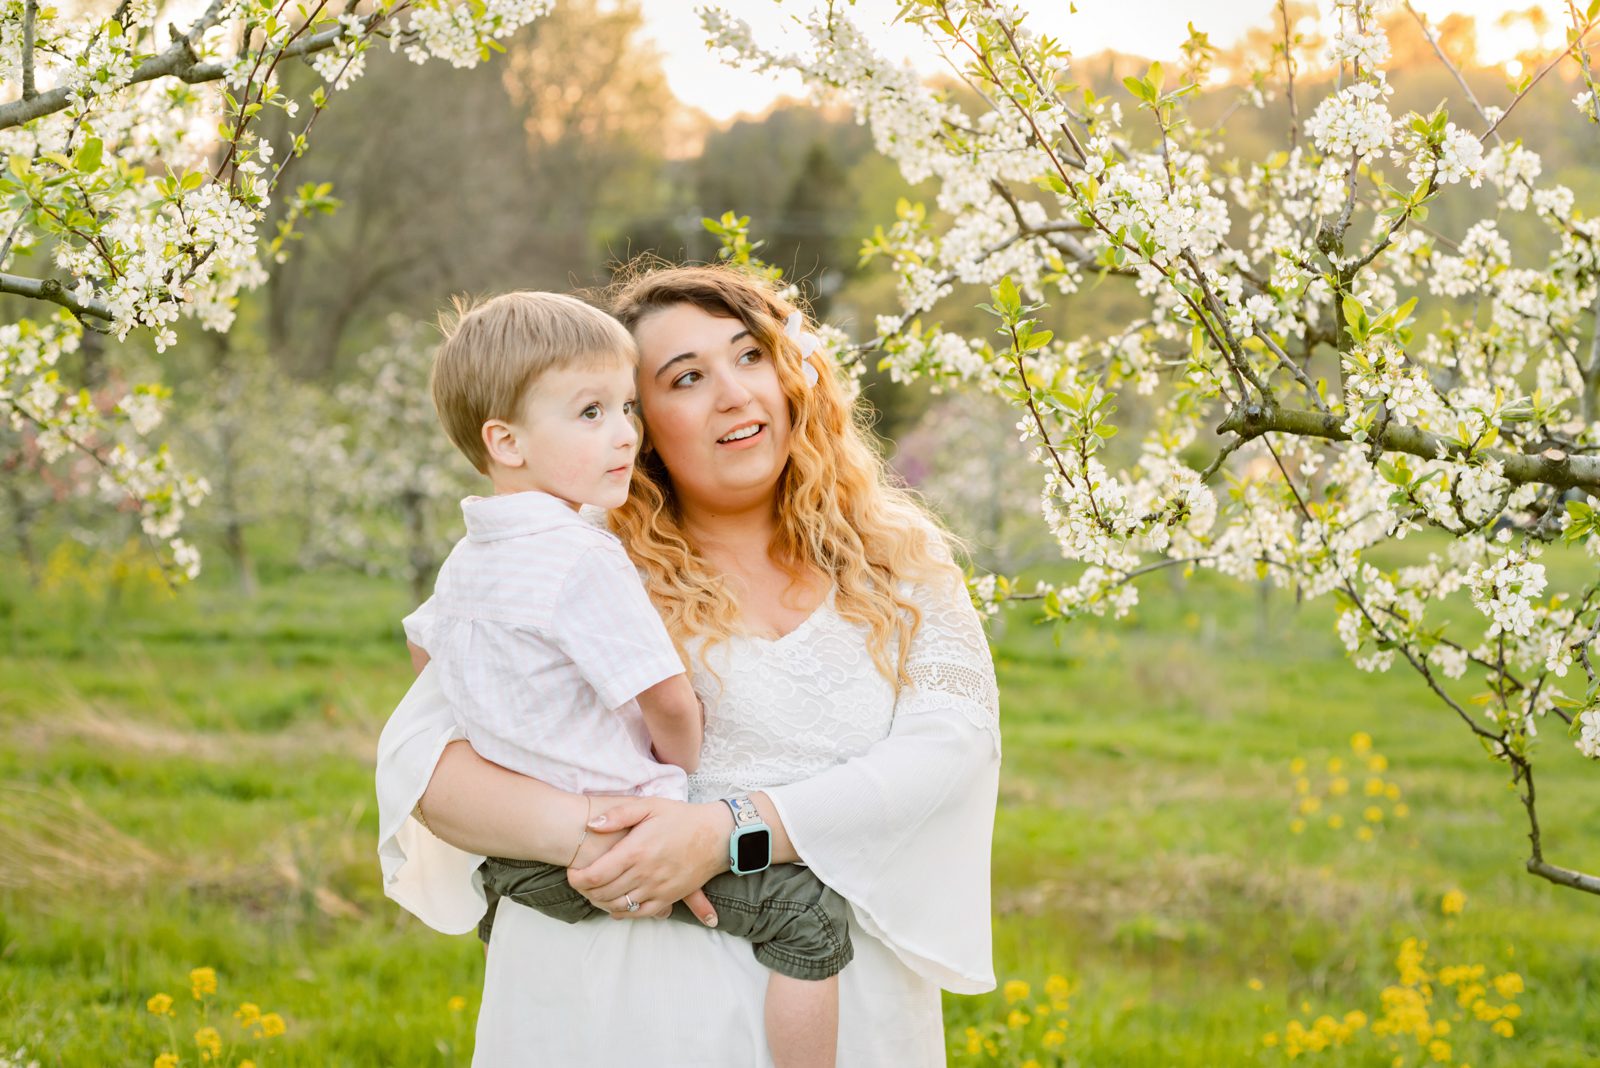 a mom standing in an orchard with white apple blossoms all around her holding her son in her arms and looking at the flowers during a spring photo session